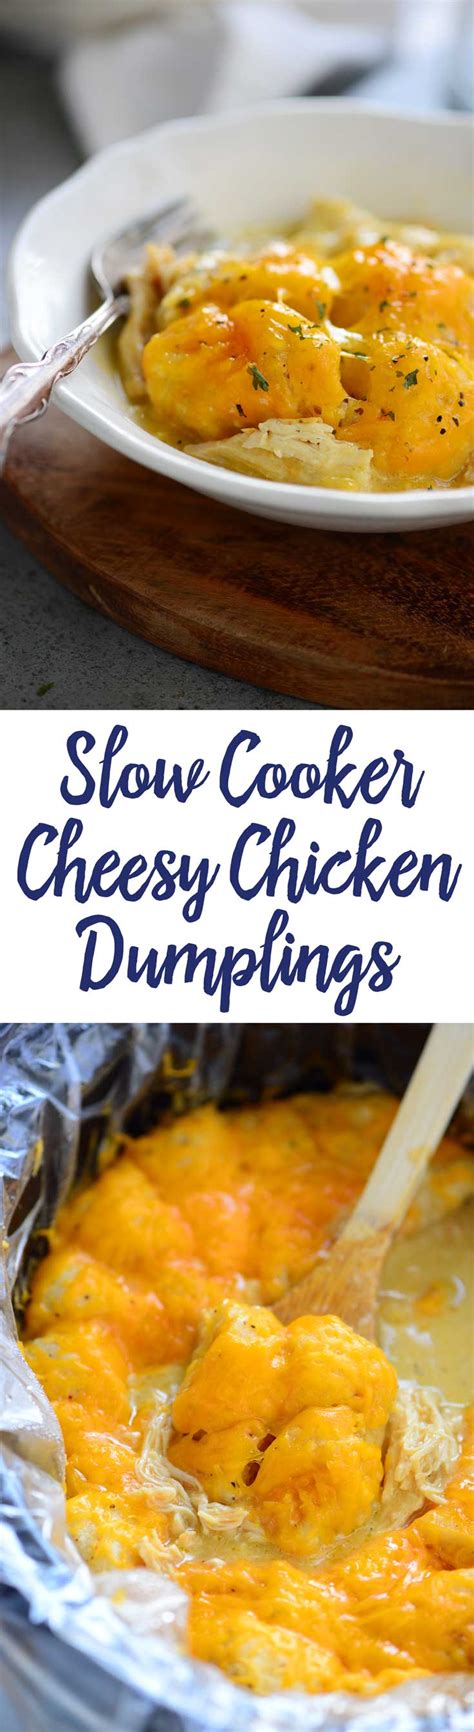 Slow Cooker Garlic Herb Cheesy Chicken Dumplings Are An Easy Dinner